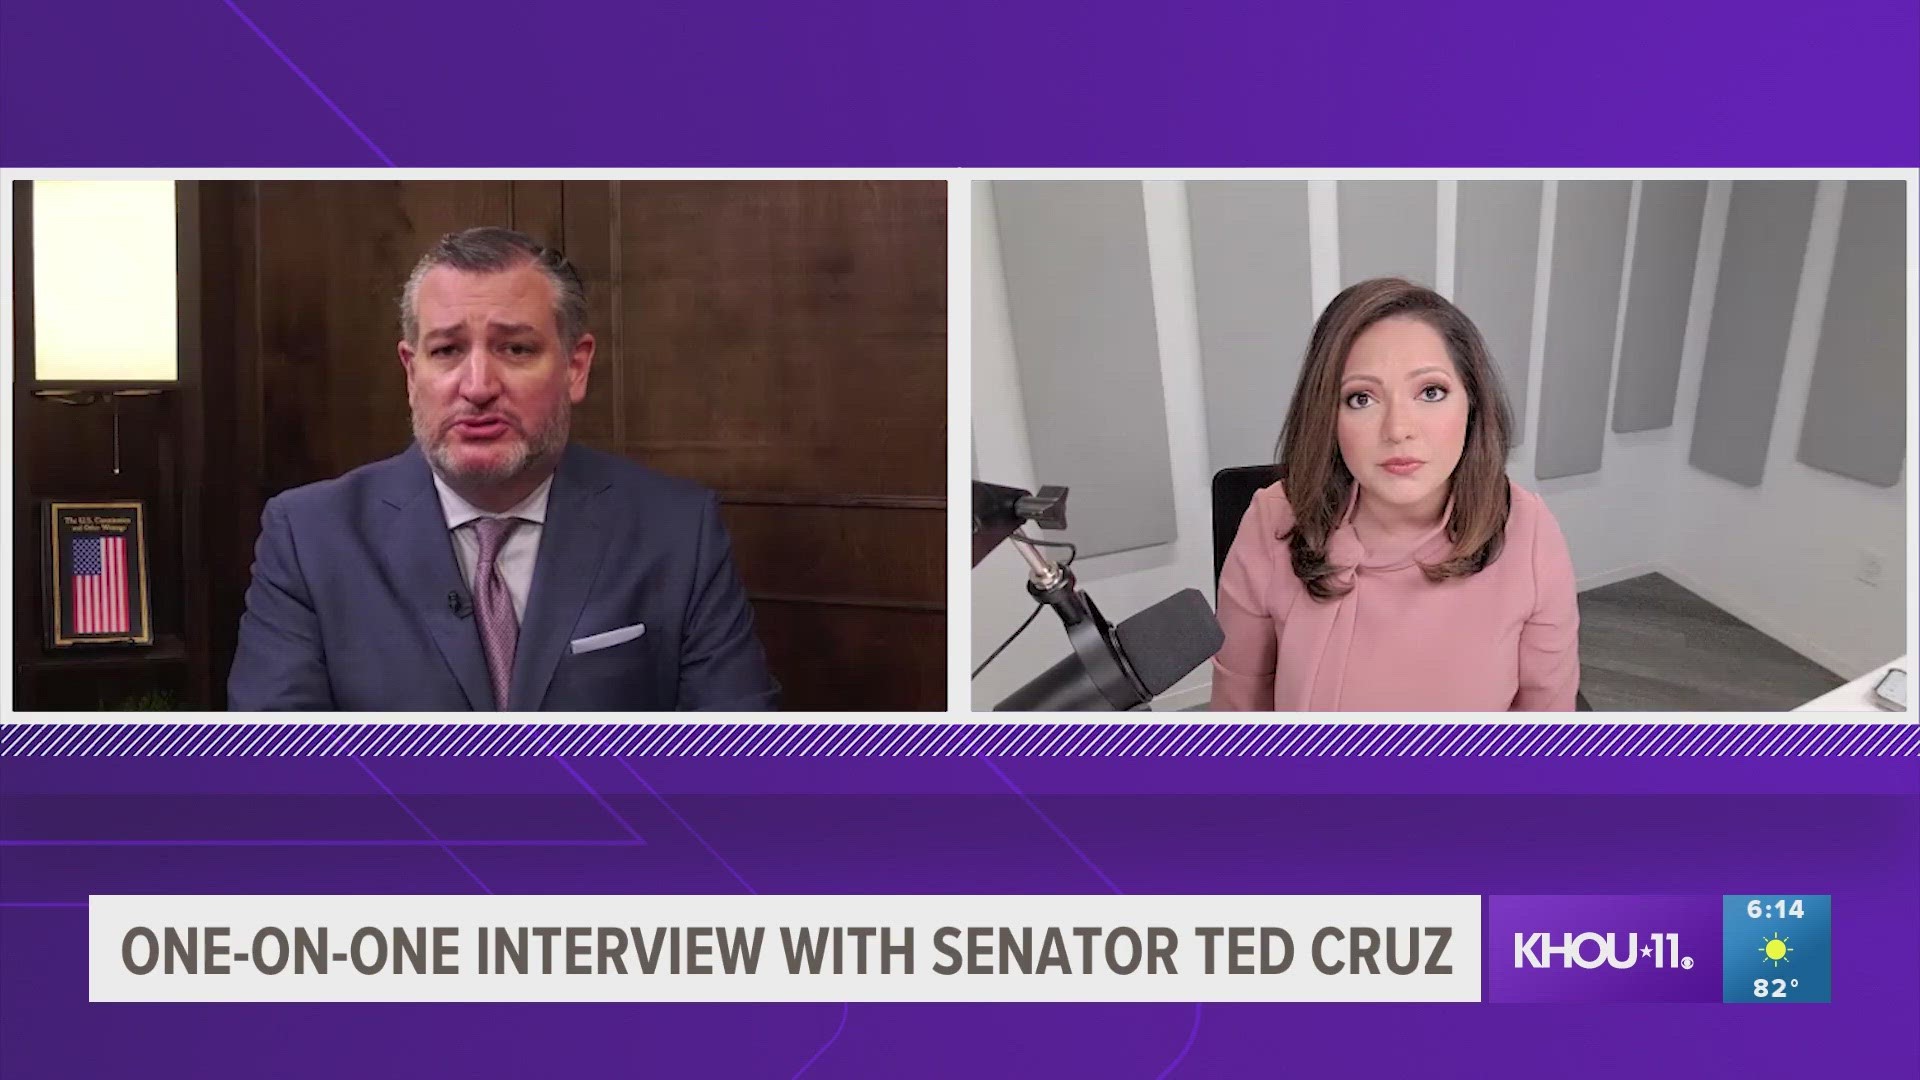 Sen. Ted Cruz opened up about a wide range of topics during a one-on-one interview with KHOU 11's Rekha Muddaraj.